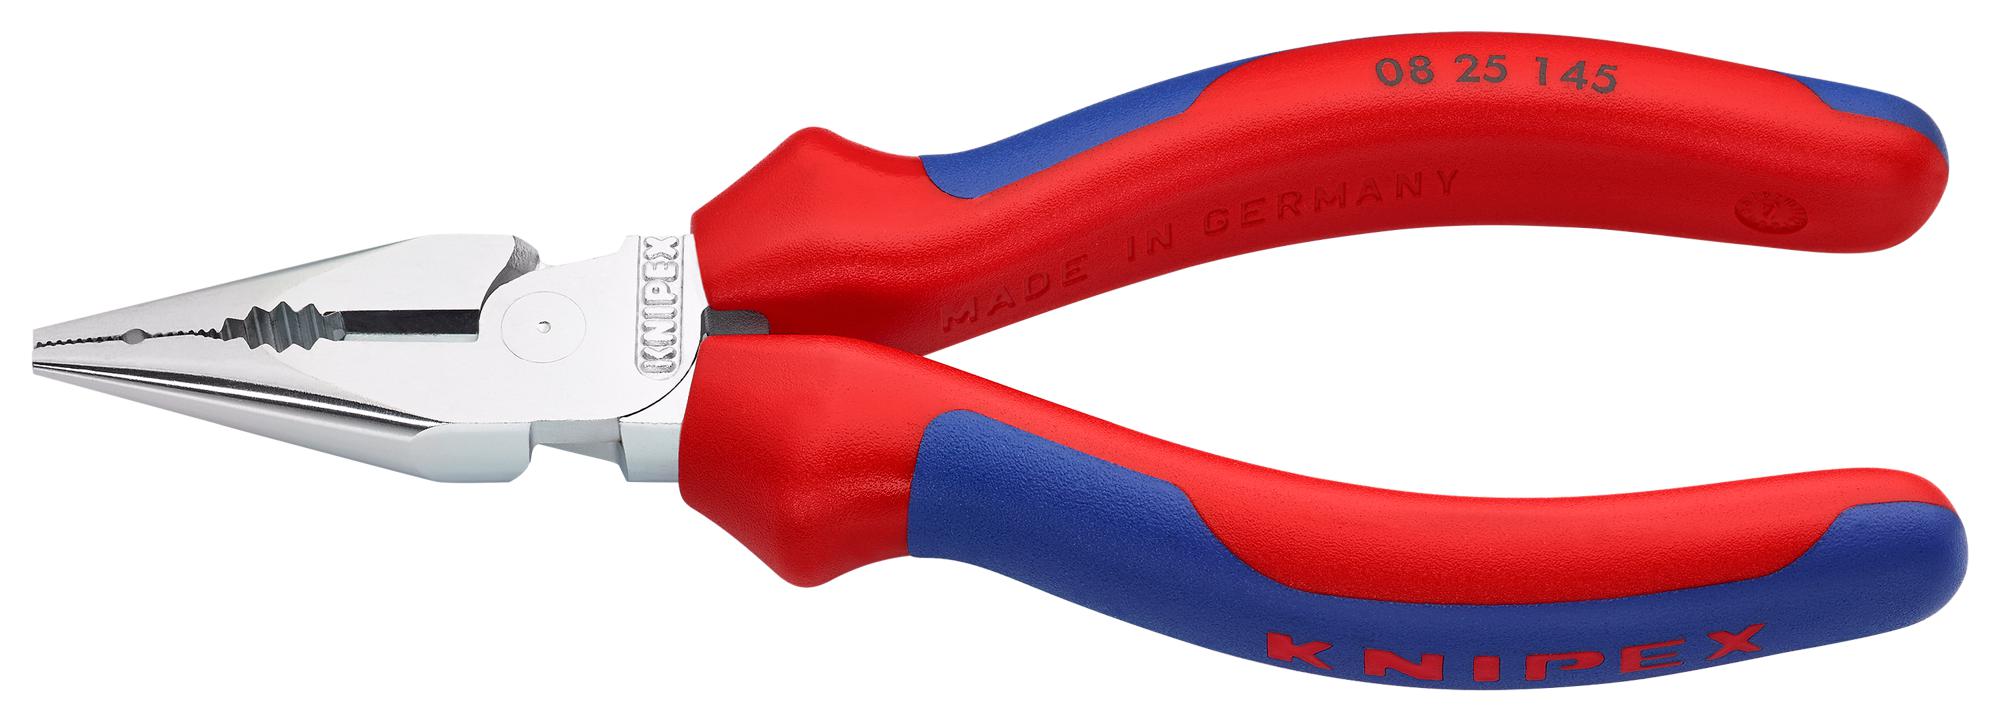 08 25 145 COMBINATION PLIER, NEEDLE NOSE, 145MM KNIPEX